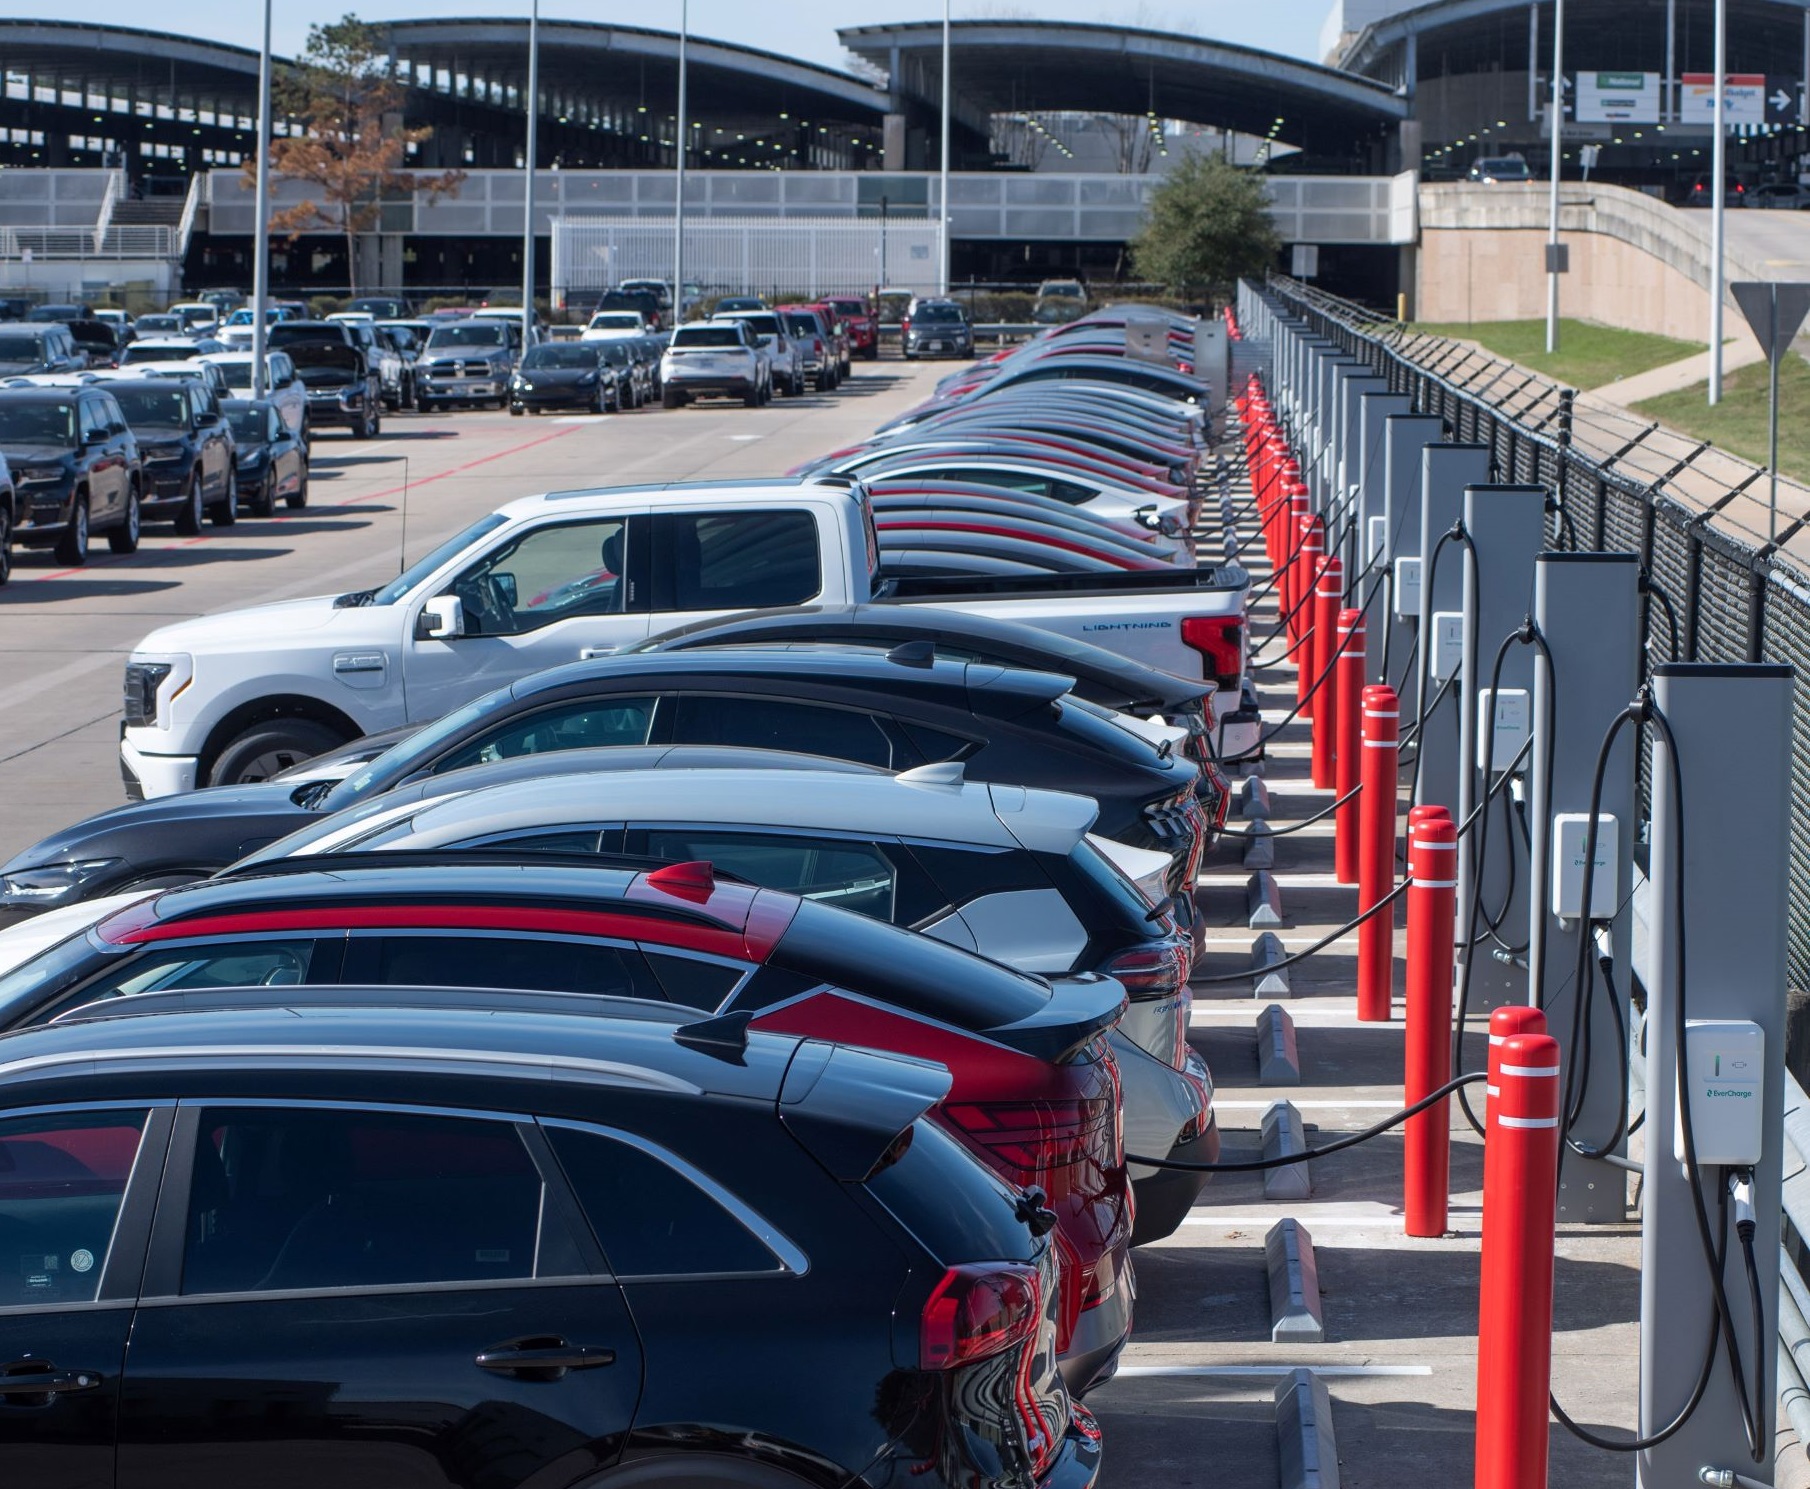 Key players in the EV charging station are launching EV fast-charging hubs for airports